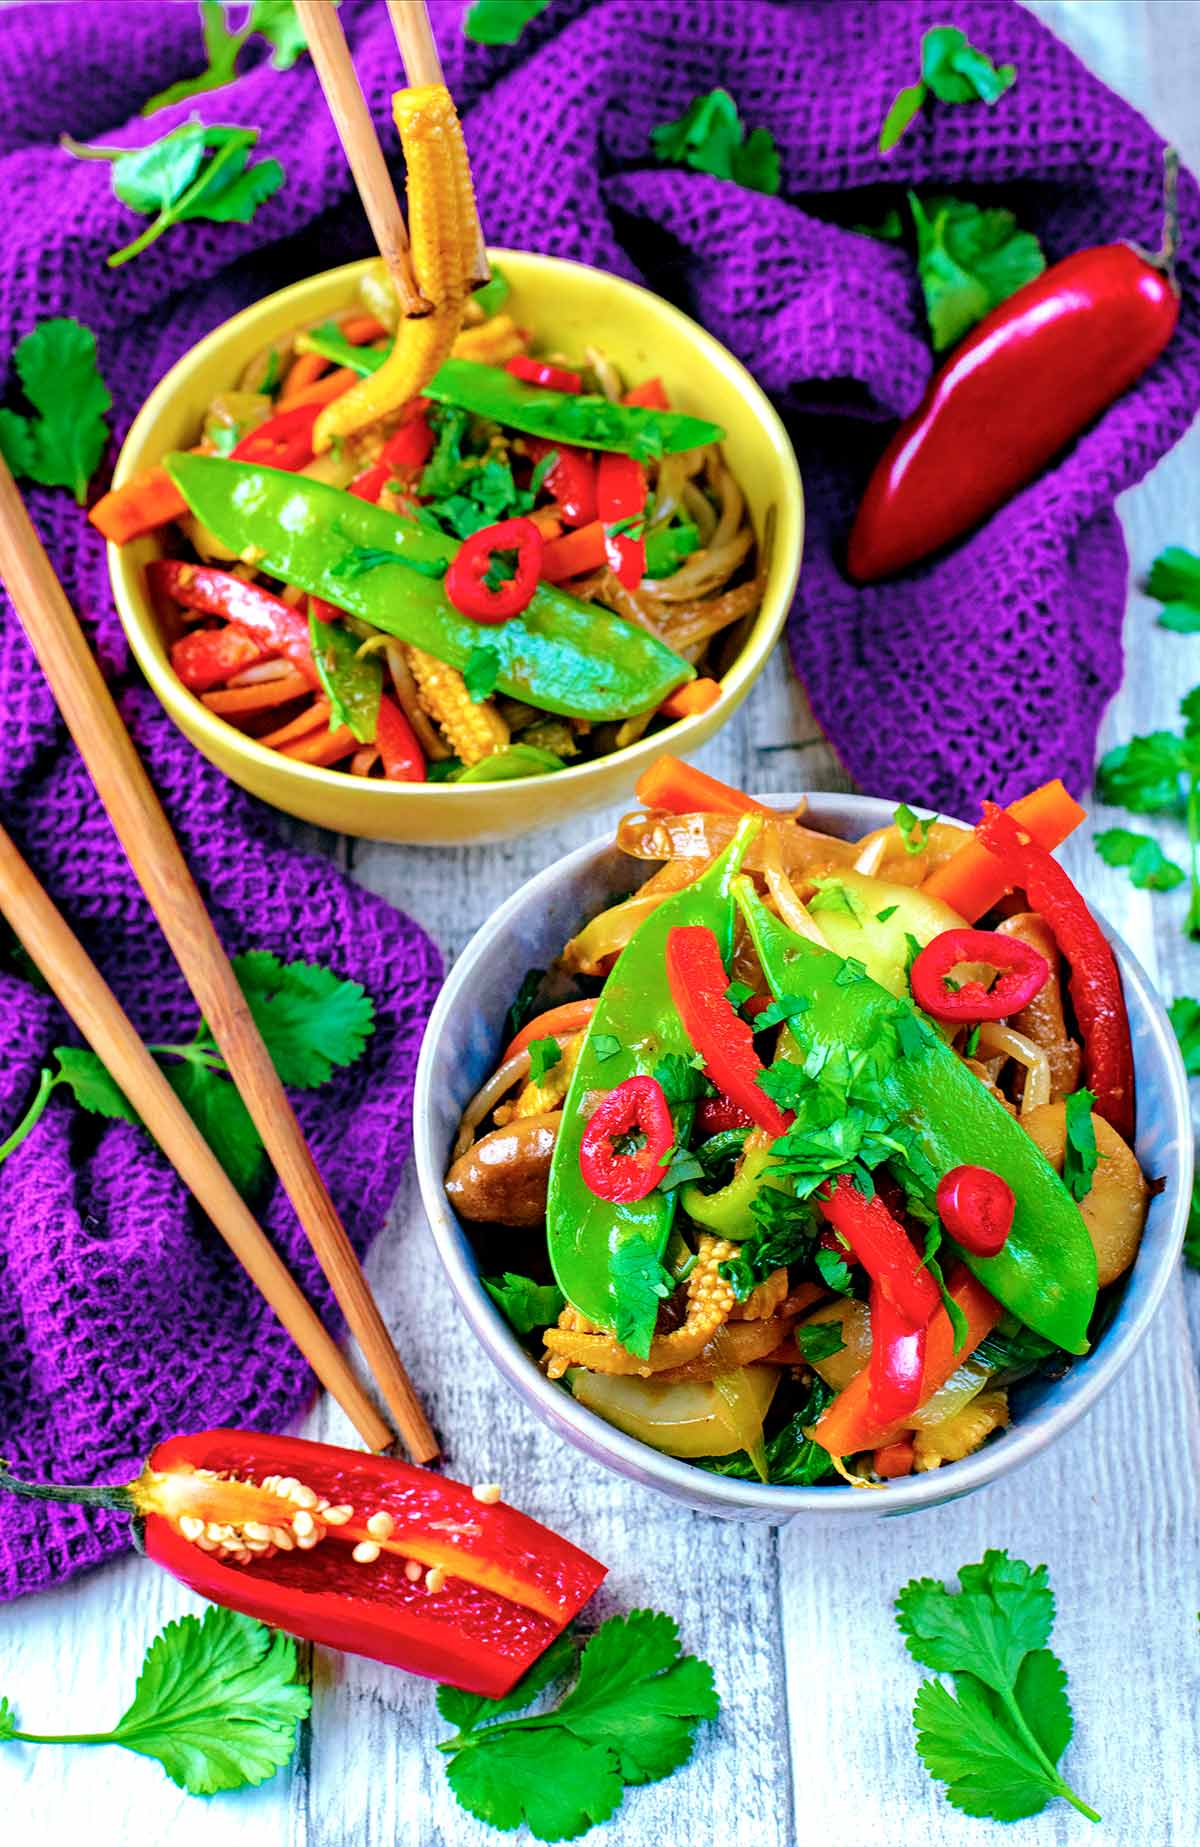 Vegetable stir fry in two bowls next to chopsticks.